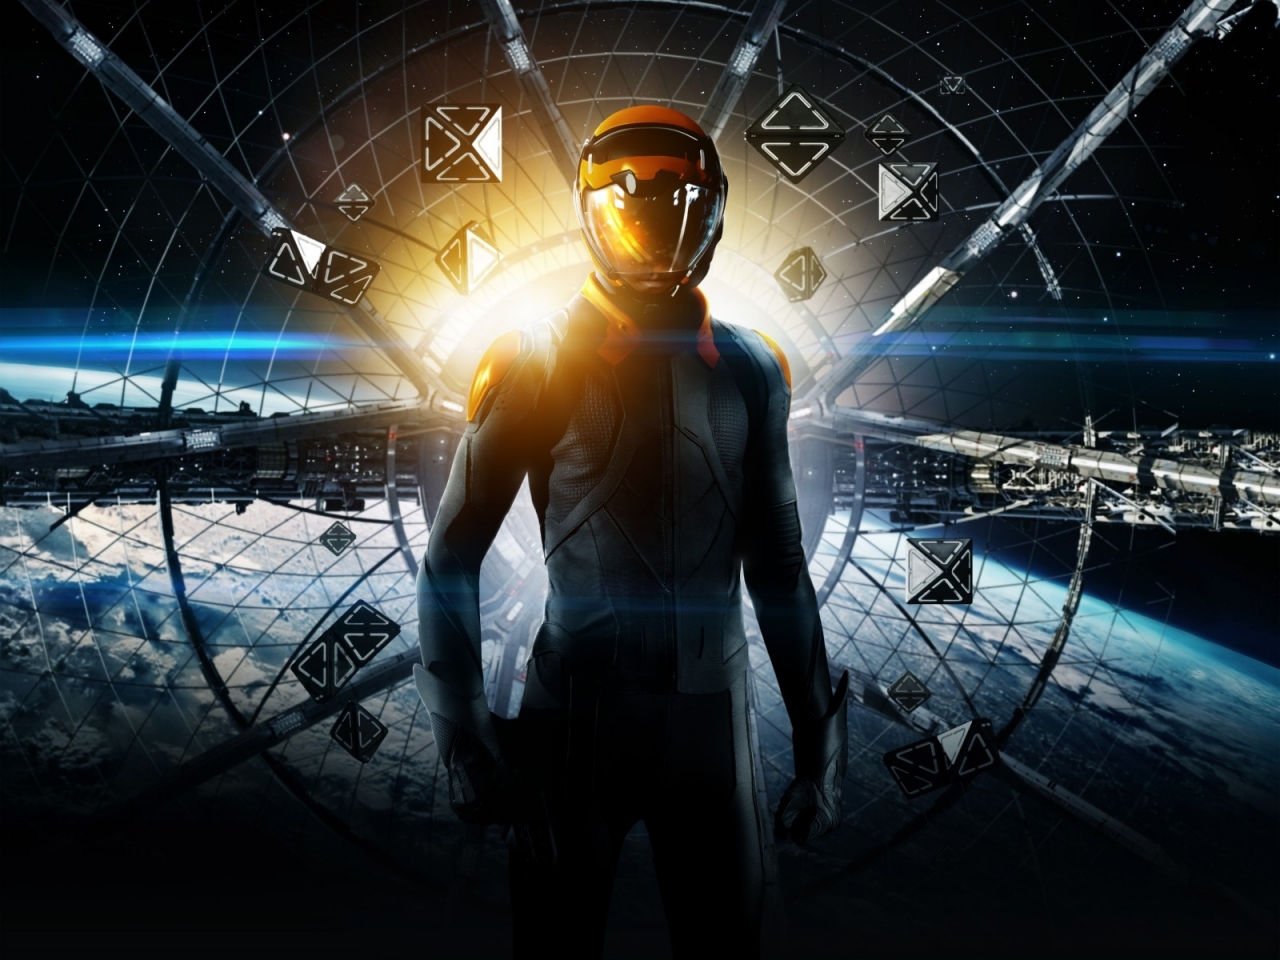 Ender's Game Poster for 1280 x 960 resolution